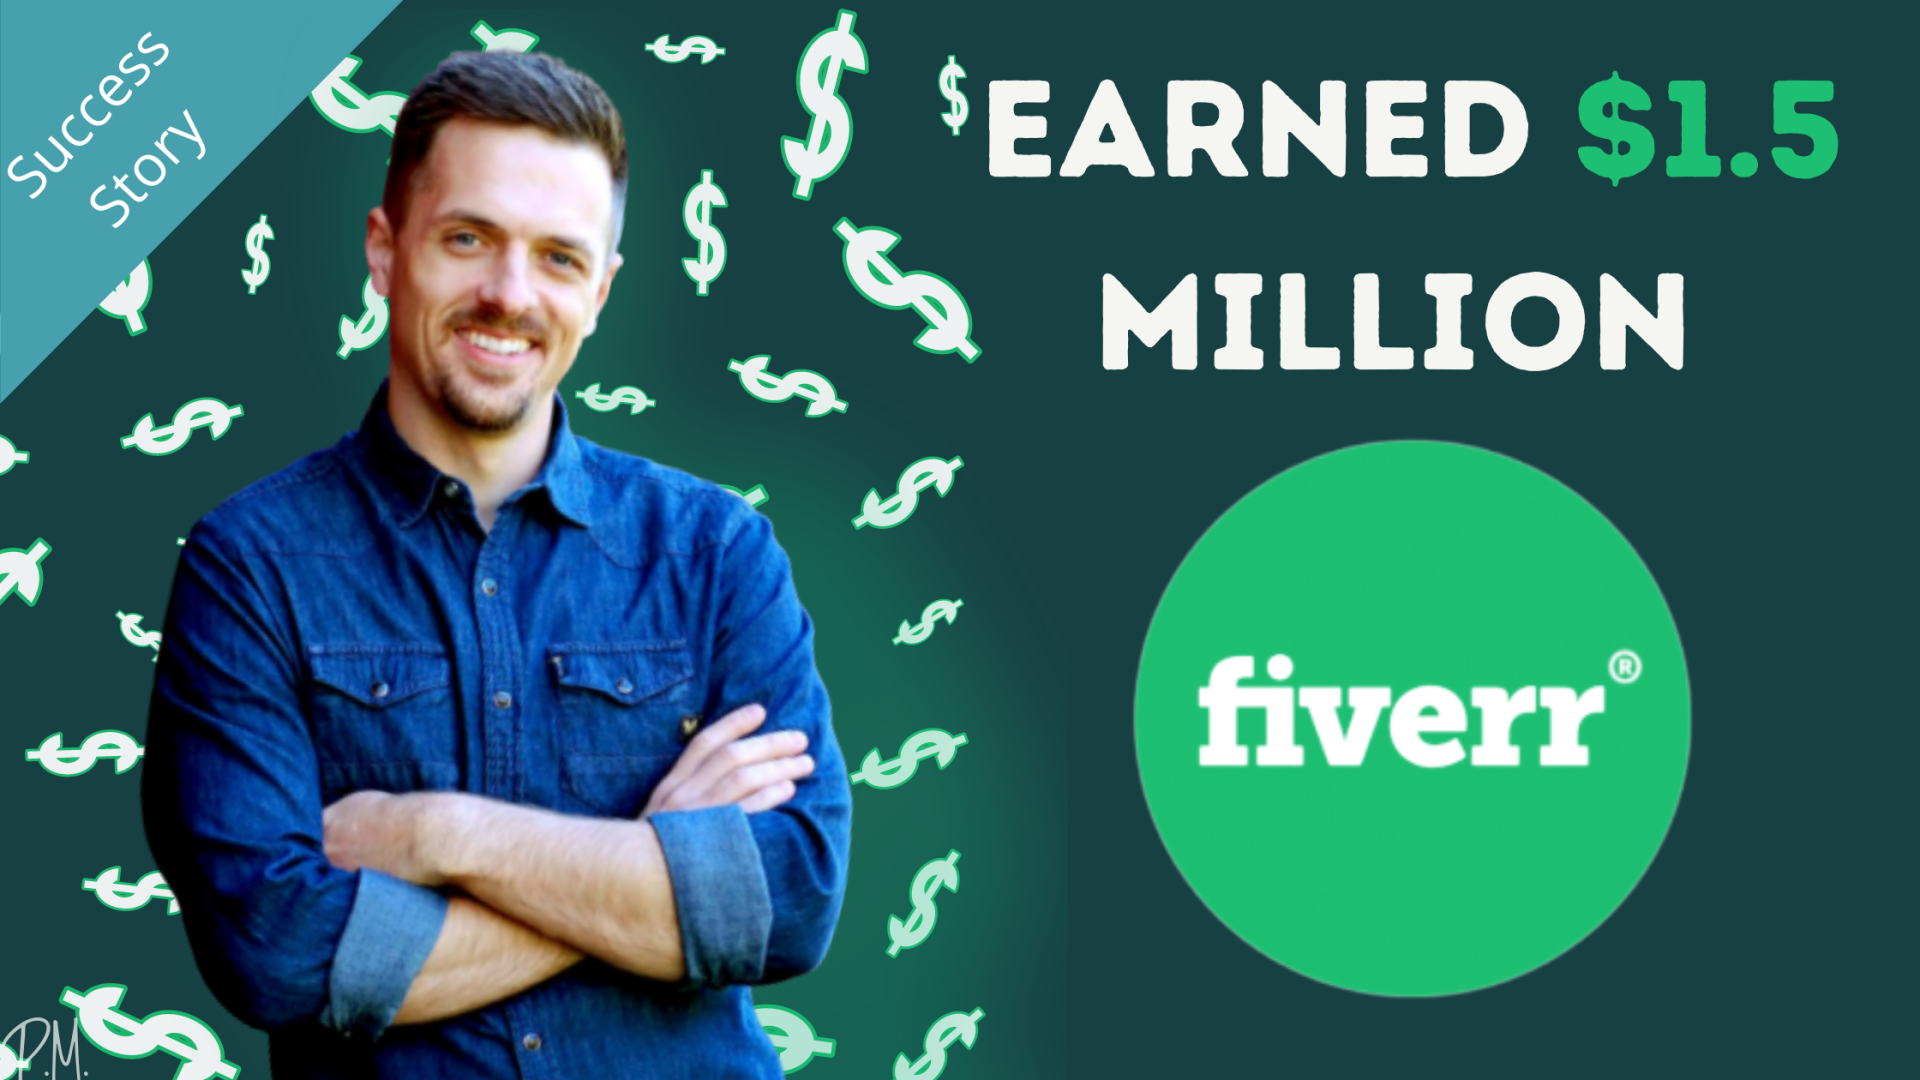 Joel young fiverr freelance success story